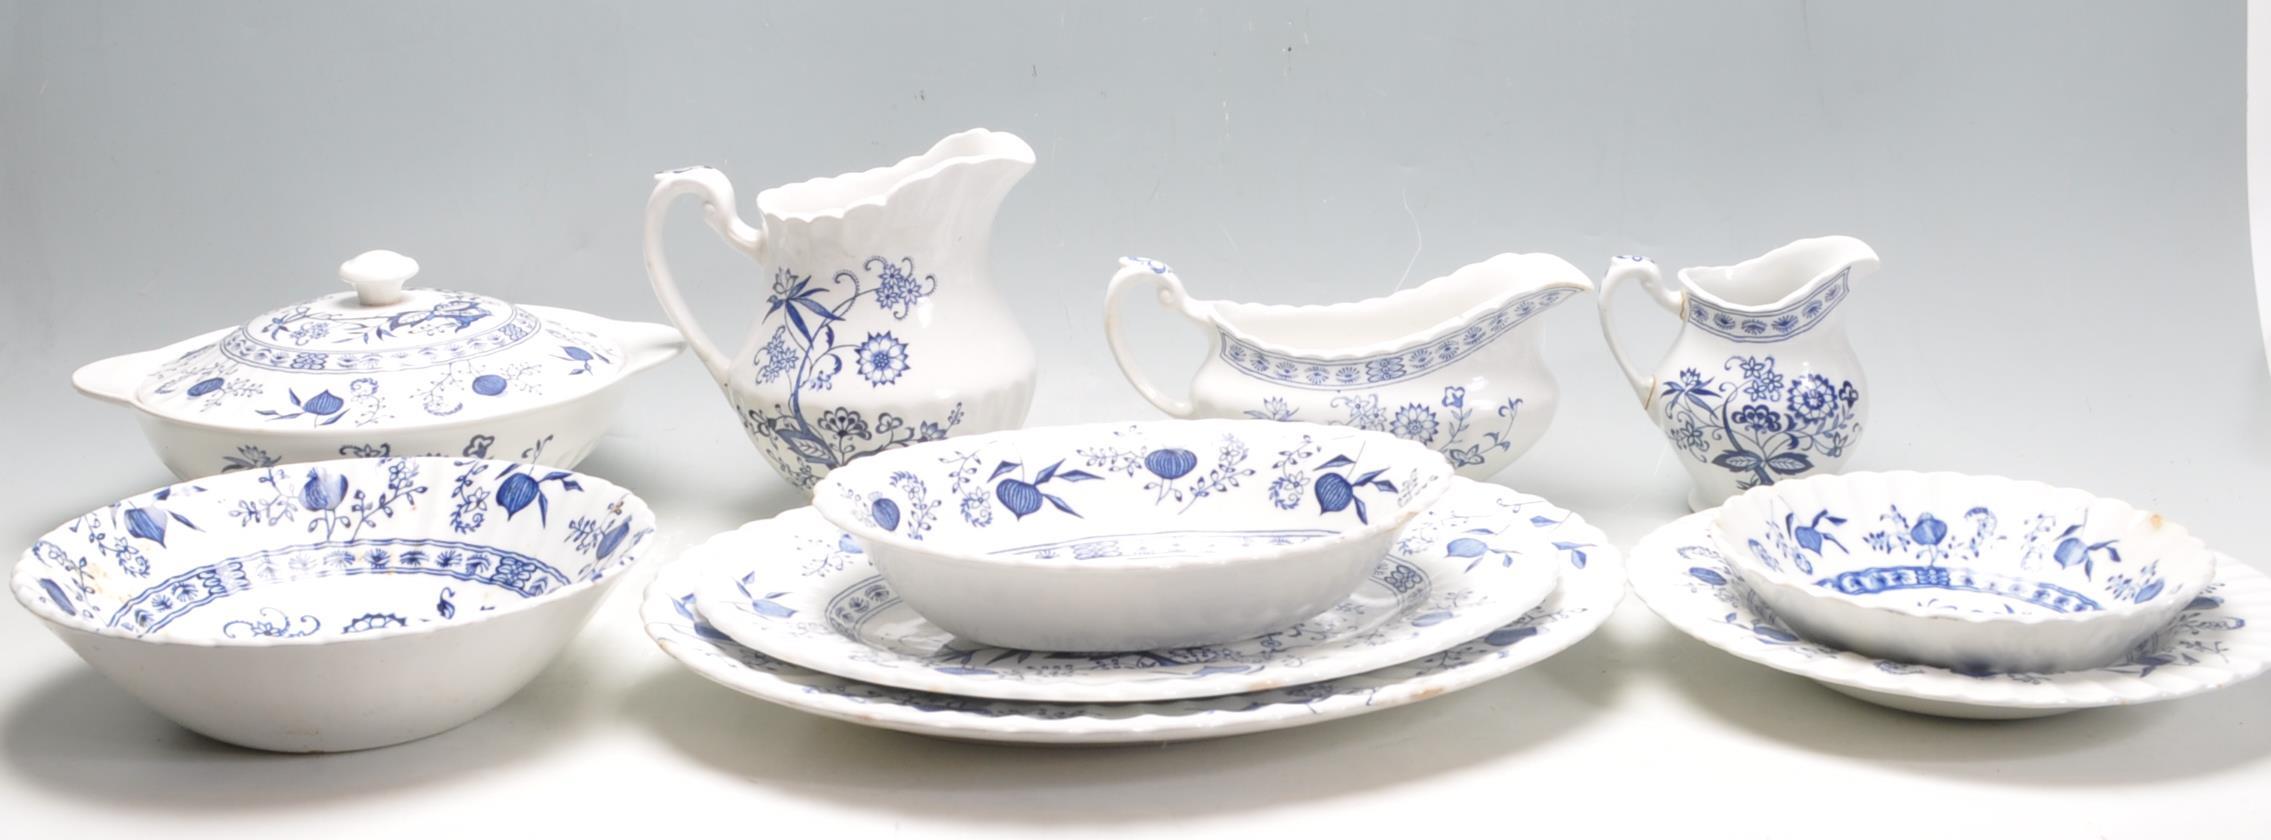 BLUE AND WHITE DINNER SERVICE BY J & G MEAKIN IN BLUE NORDIC PATTERN